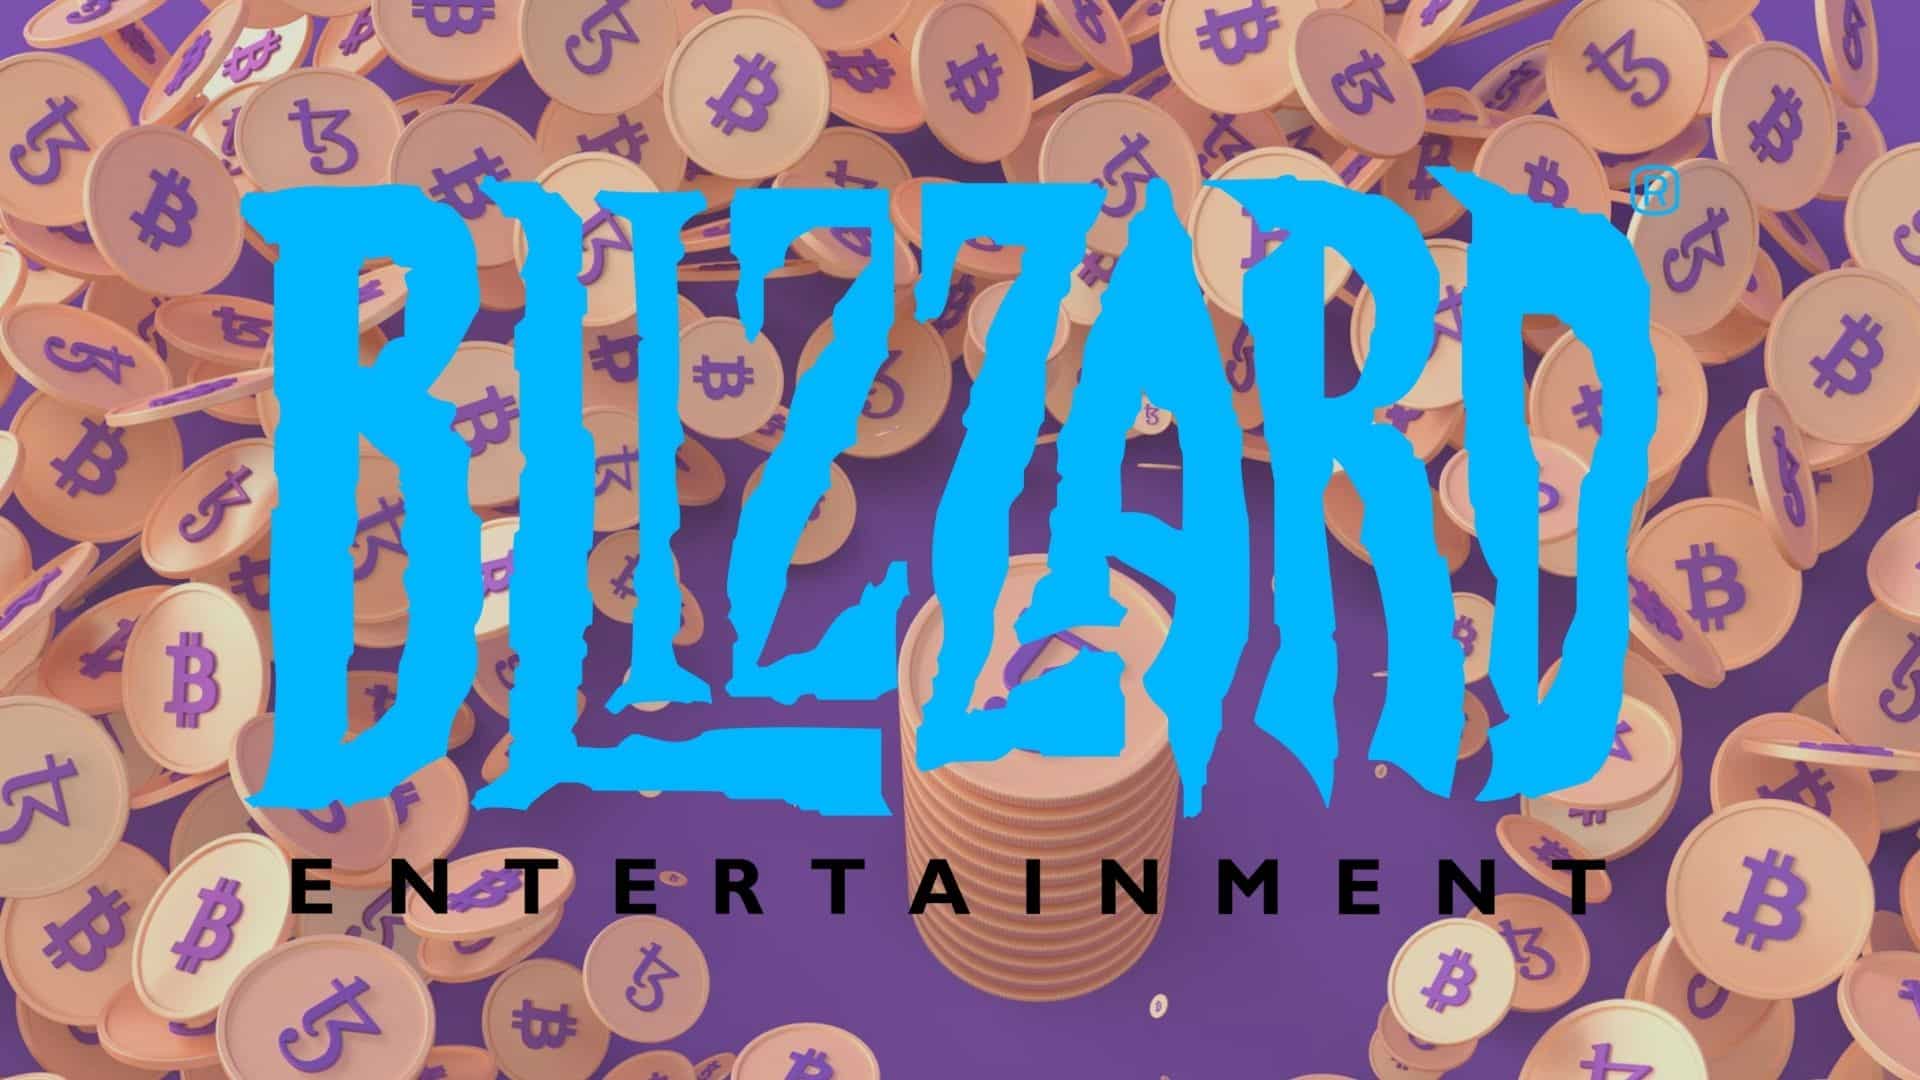 Blizzard President Shuts Down Rumors Over Nfts Play To Earn Games